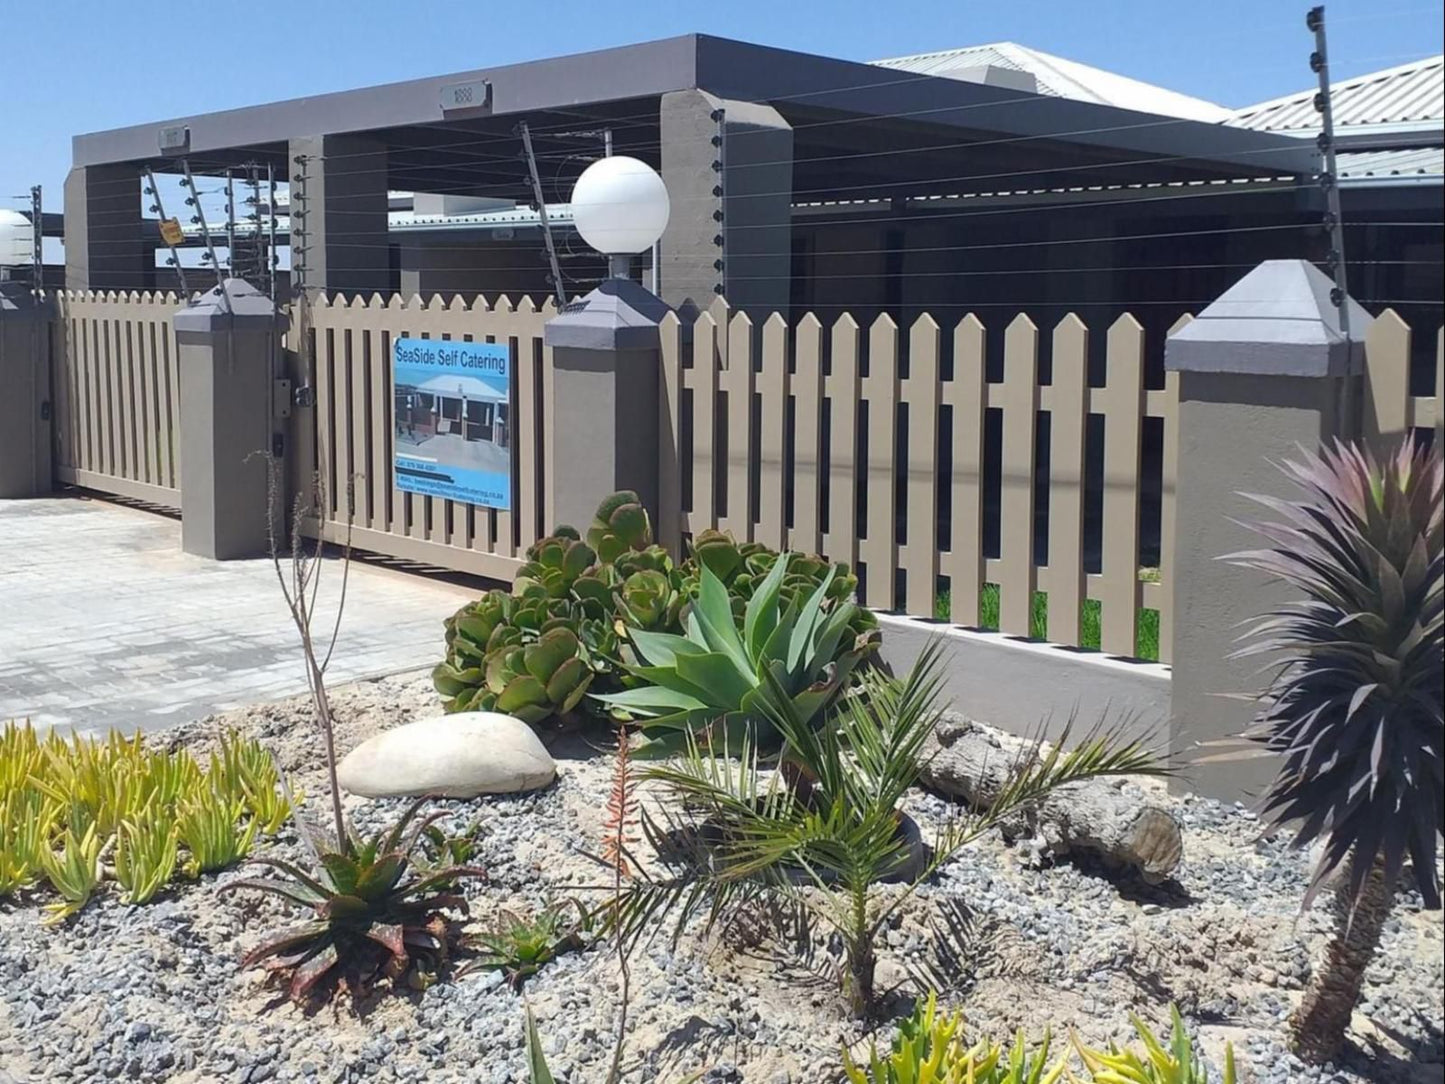 Seaside Self Catering Mcdougall S Bay Port Nolloth Northern Cape South Africa 